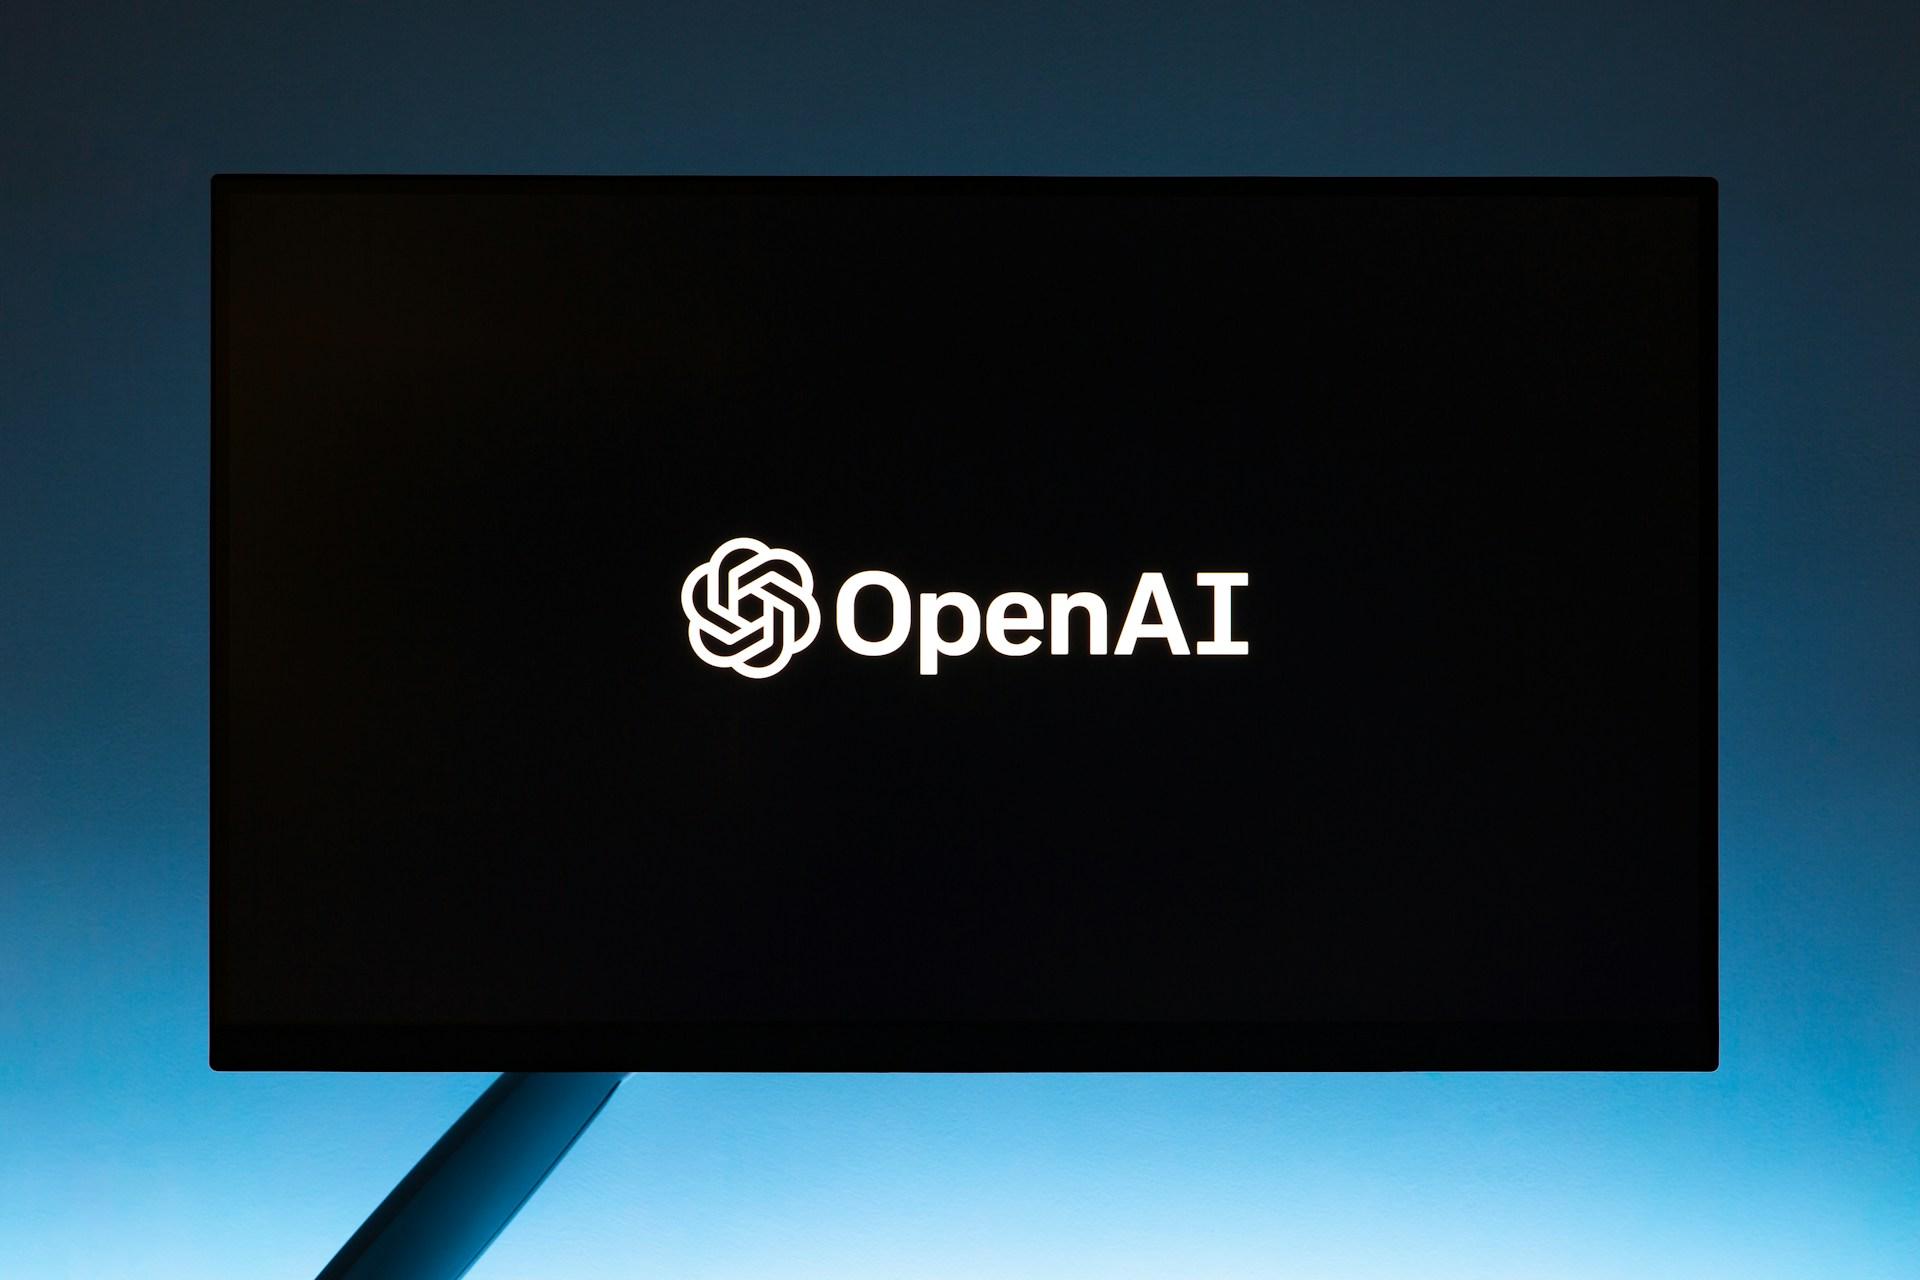 OpenAI enters the smart search field, announces the launch of the AI search engine SearchGPT.